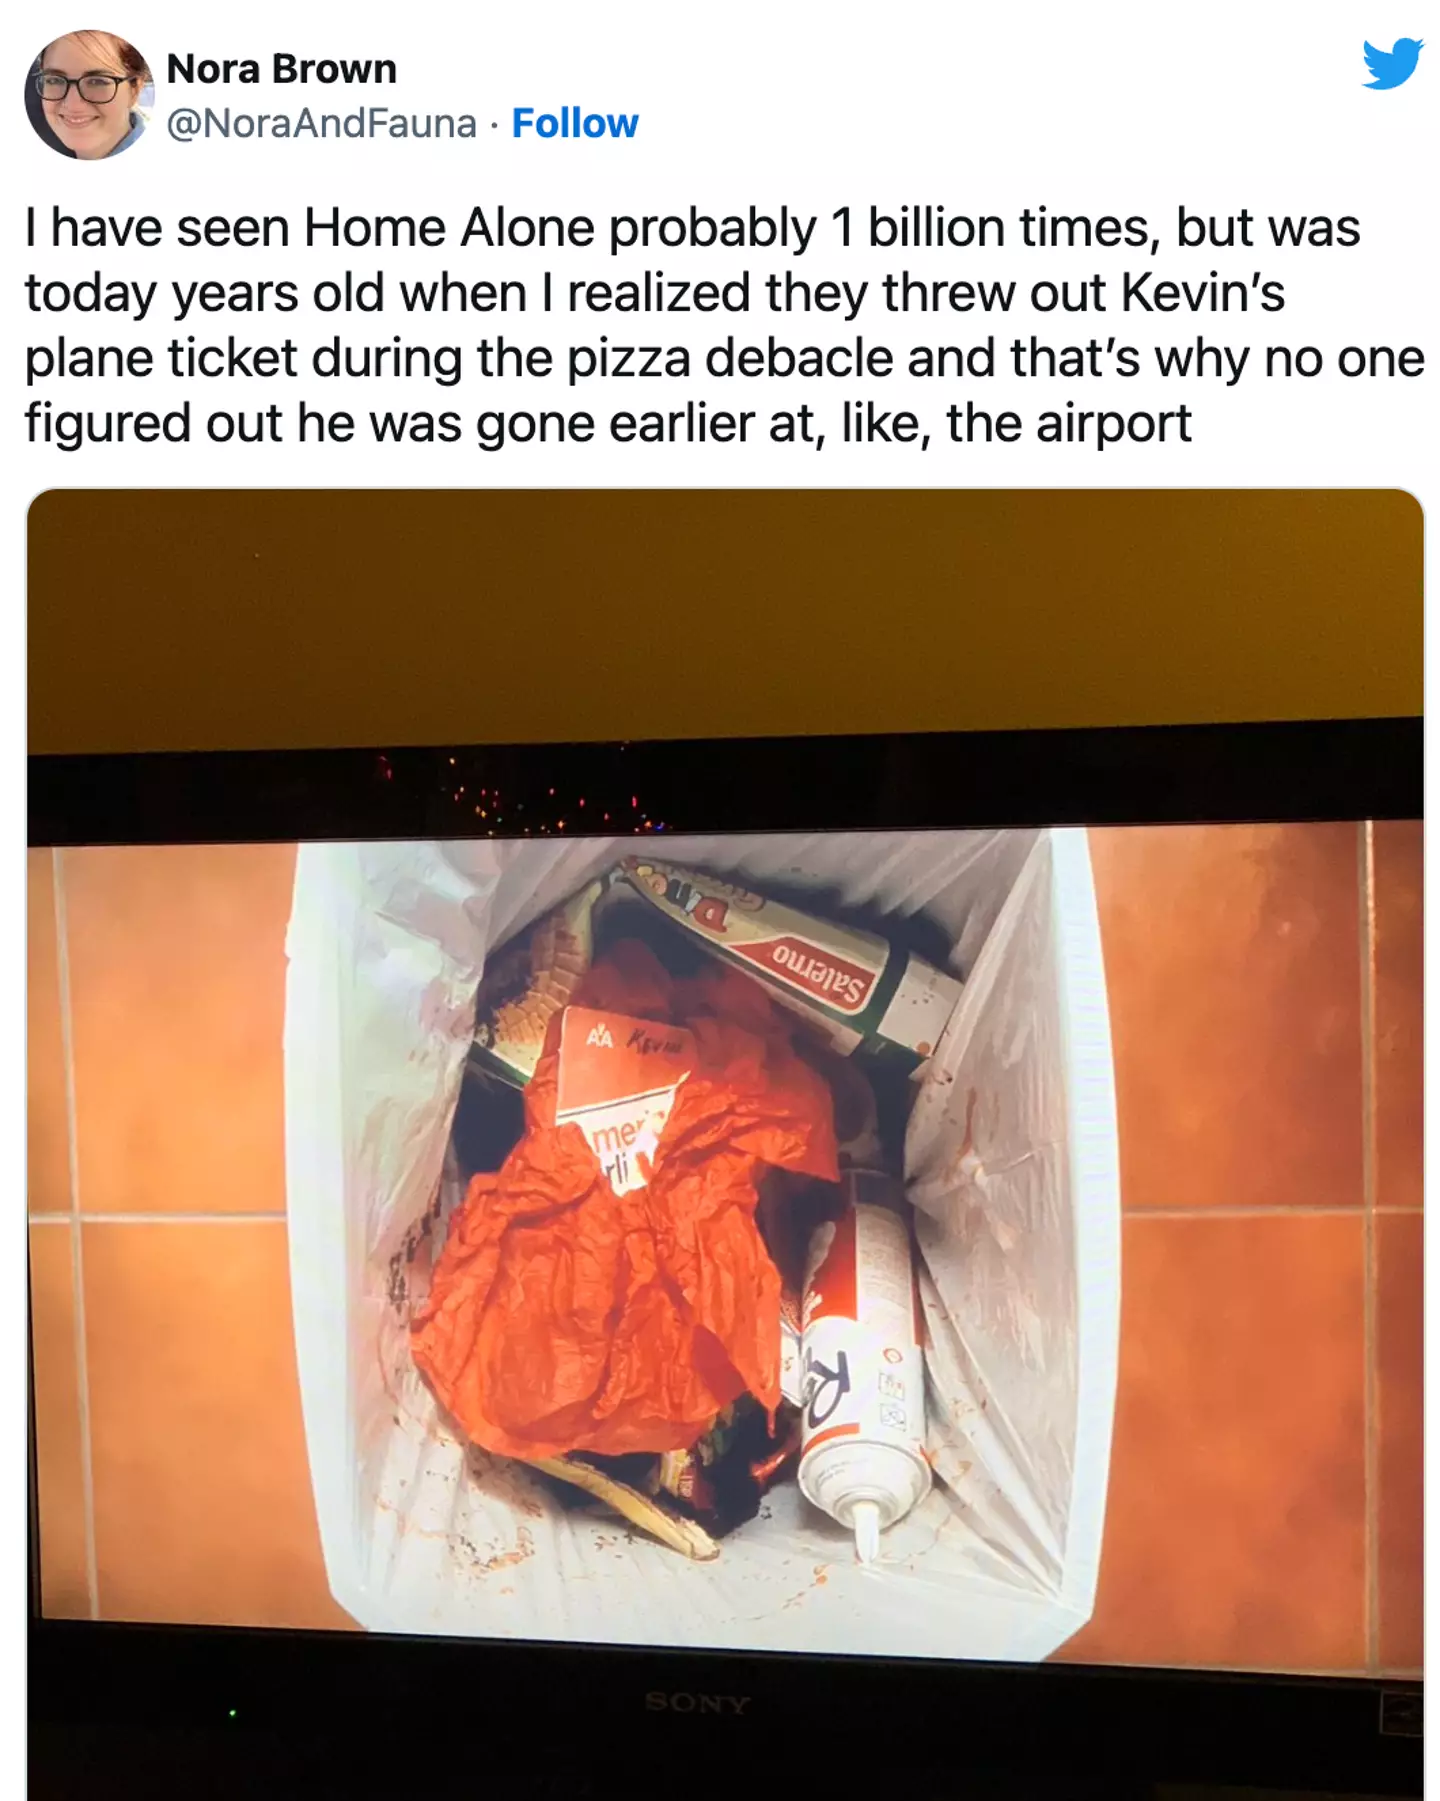 Despite watching Home Alone 'one billion times' one user was 'today years old' when they clocked Kevin's plane ticket ends up in the bin.